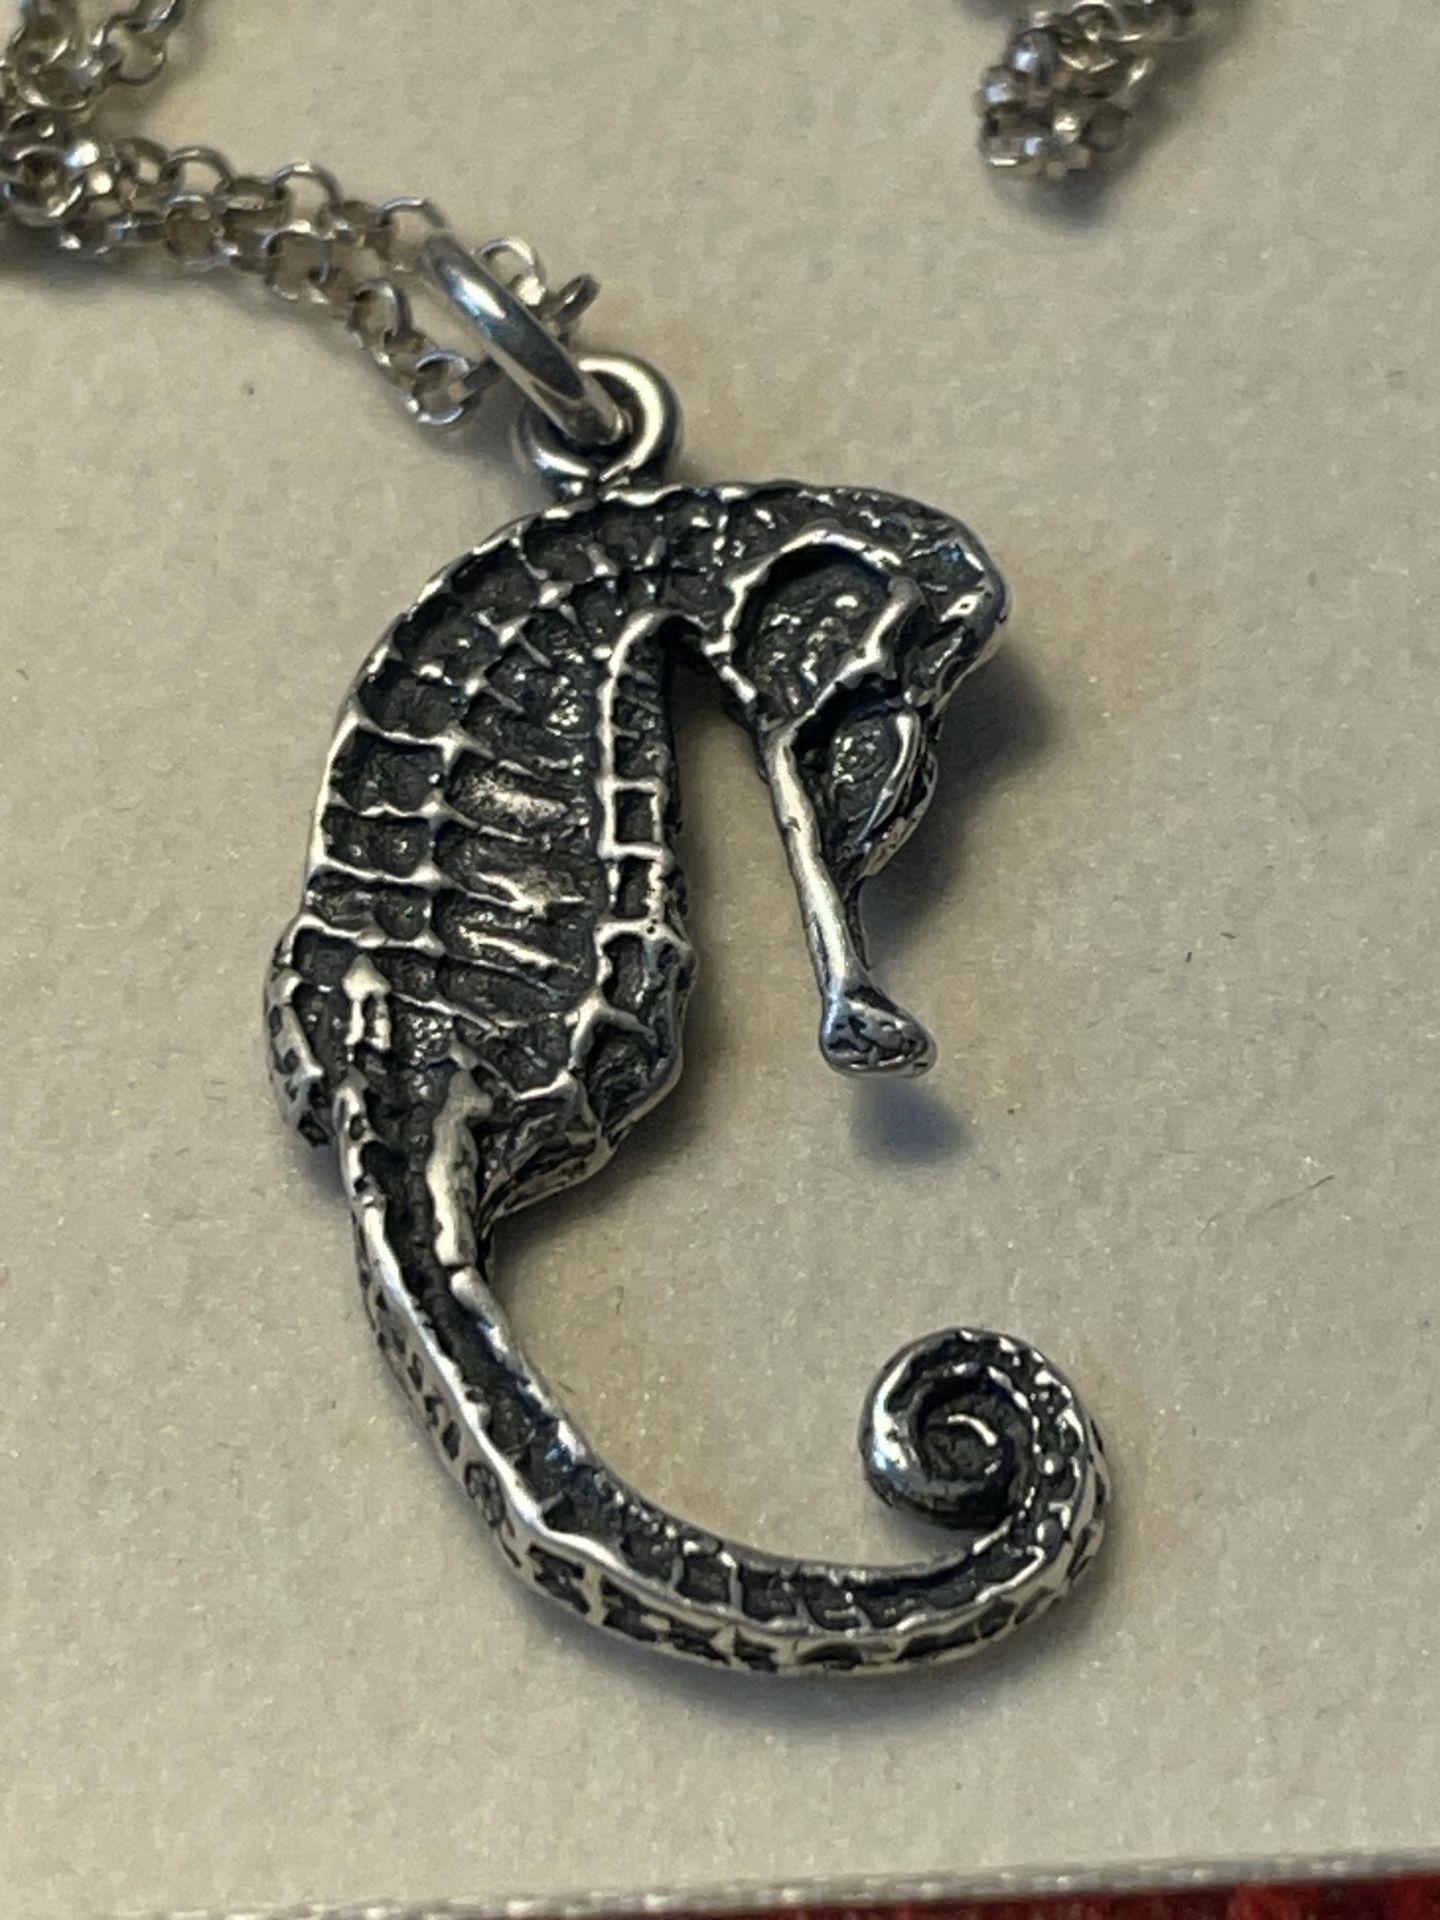 A MARKED 925 SILVER SEAHORSE PENDANT ON A NECKLACE IN A PRESENTATION BOX - Image 2 of 3